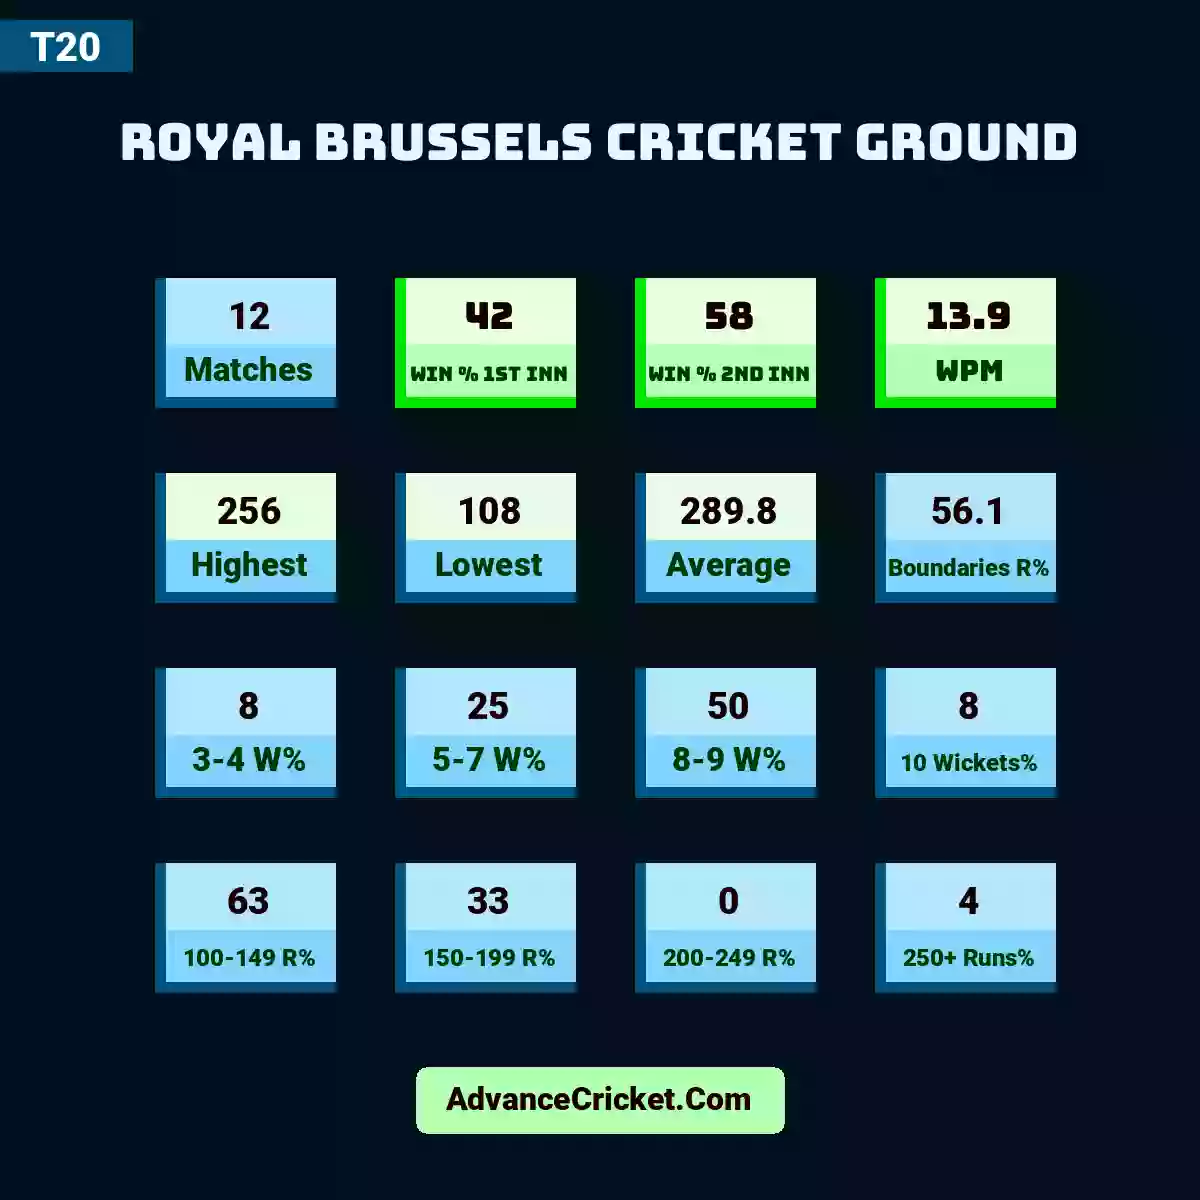 Image showing Royal Brussels Cricket Ground with Matches: 12, Win % 1st Inn: 42, Win % 2nd Inn: 58, WPM: 13.9, Highest: 256, Lowest: 108, Average: 289.8, Boundaries R%: 56.1, 3-4 W%: 8, 5-7 W%: 25, 8-9 W%: 50, 10 Wickets%: 8, 100-149 R%: 63, 150-199 R%: 33, 200-249 R%: 0, 250+ Runs%: 4.